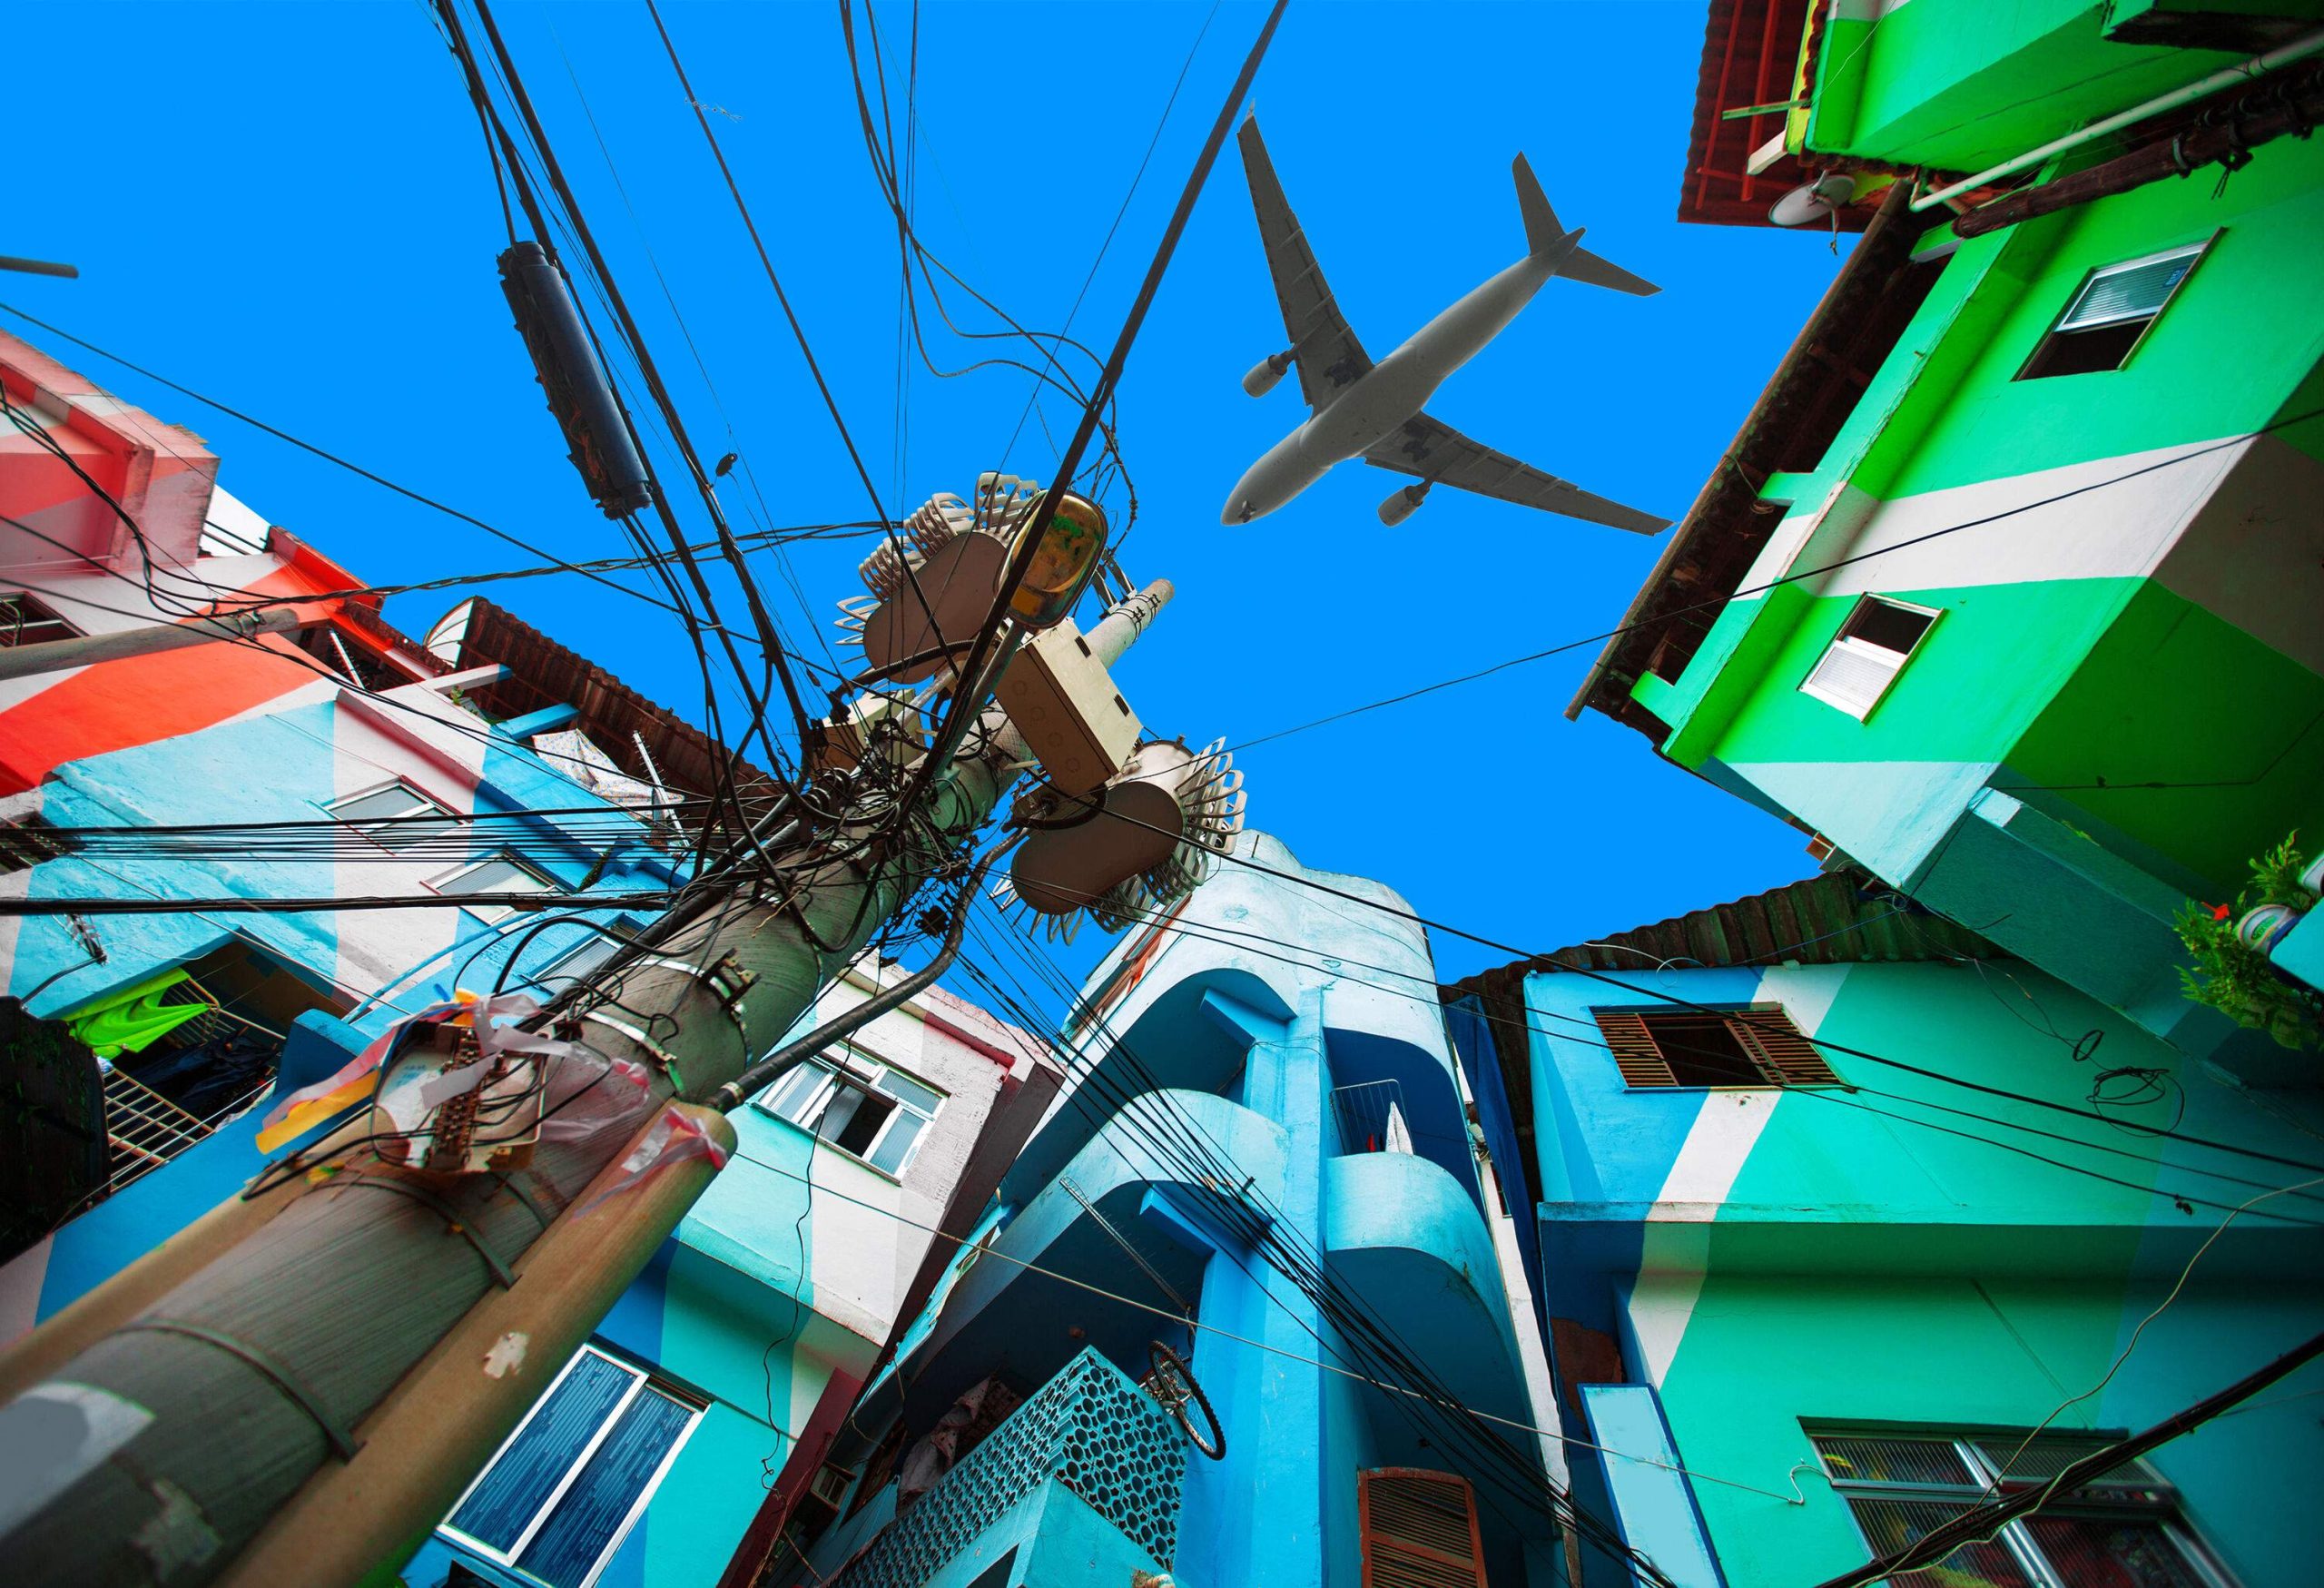 An airplane flying across the blue sky over the gap between colourful buildings.